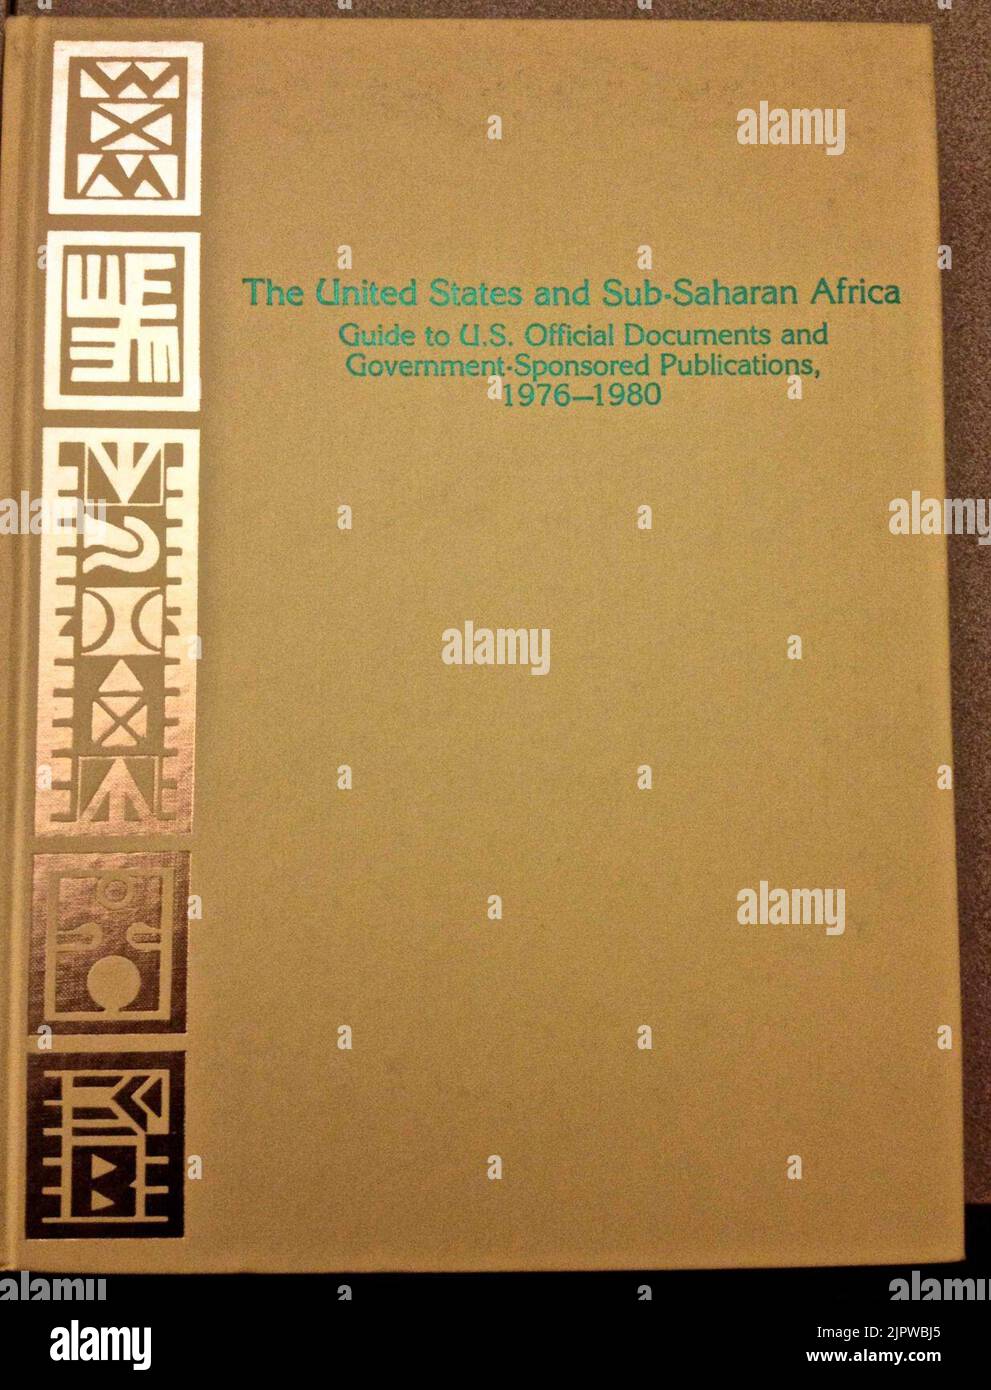 The United States and Sub-Saharan Africa - Guide to US Official Documents and Government-Sponsored Publications, 1976-1980 Stock Photo